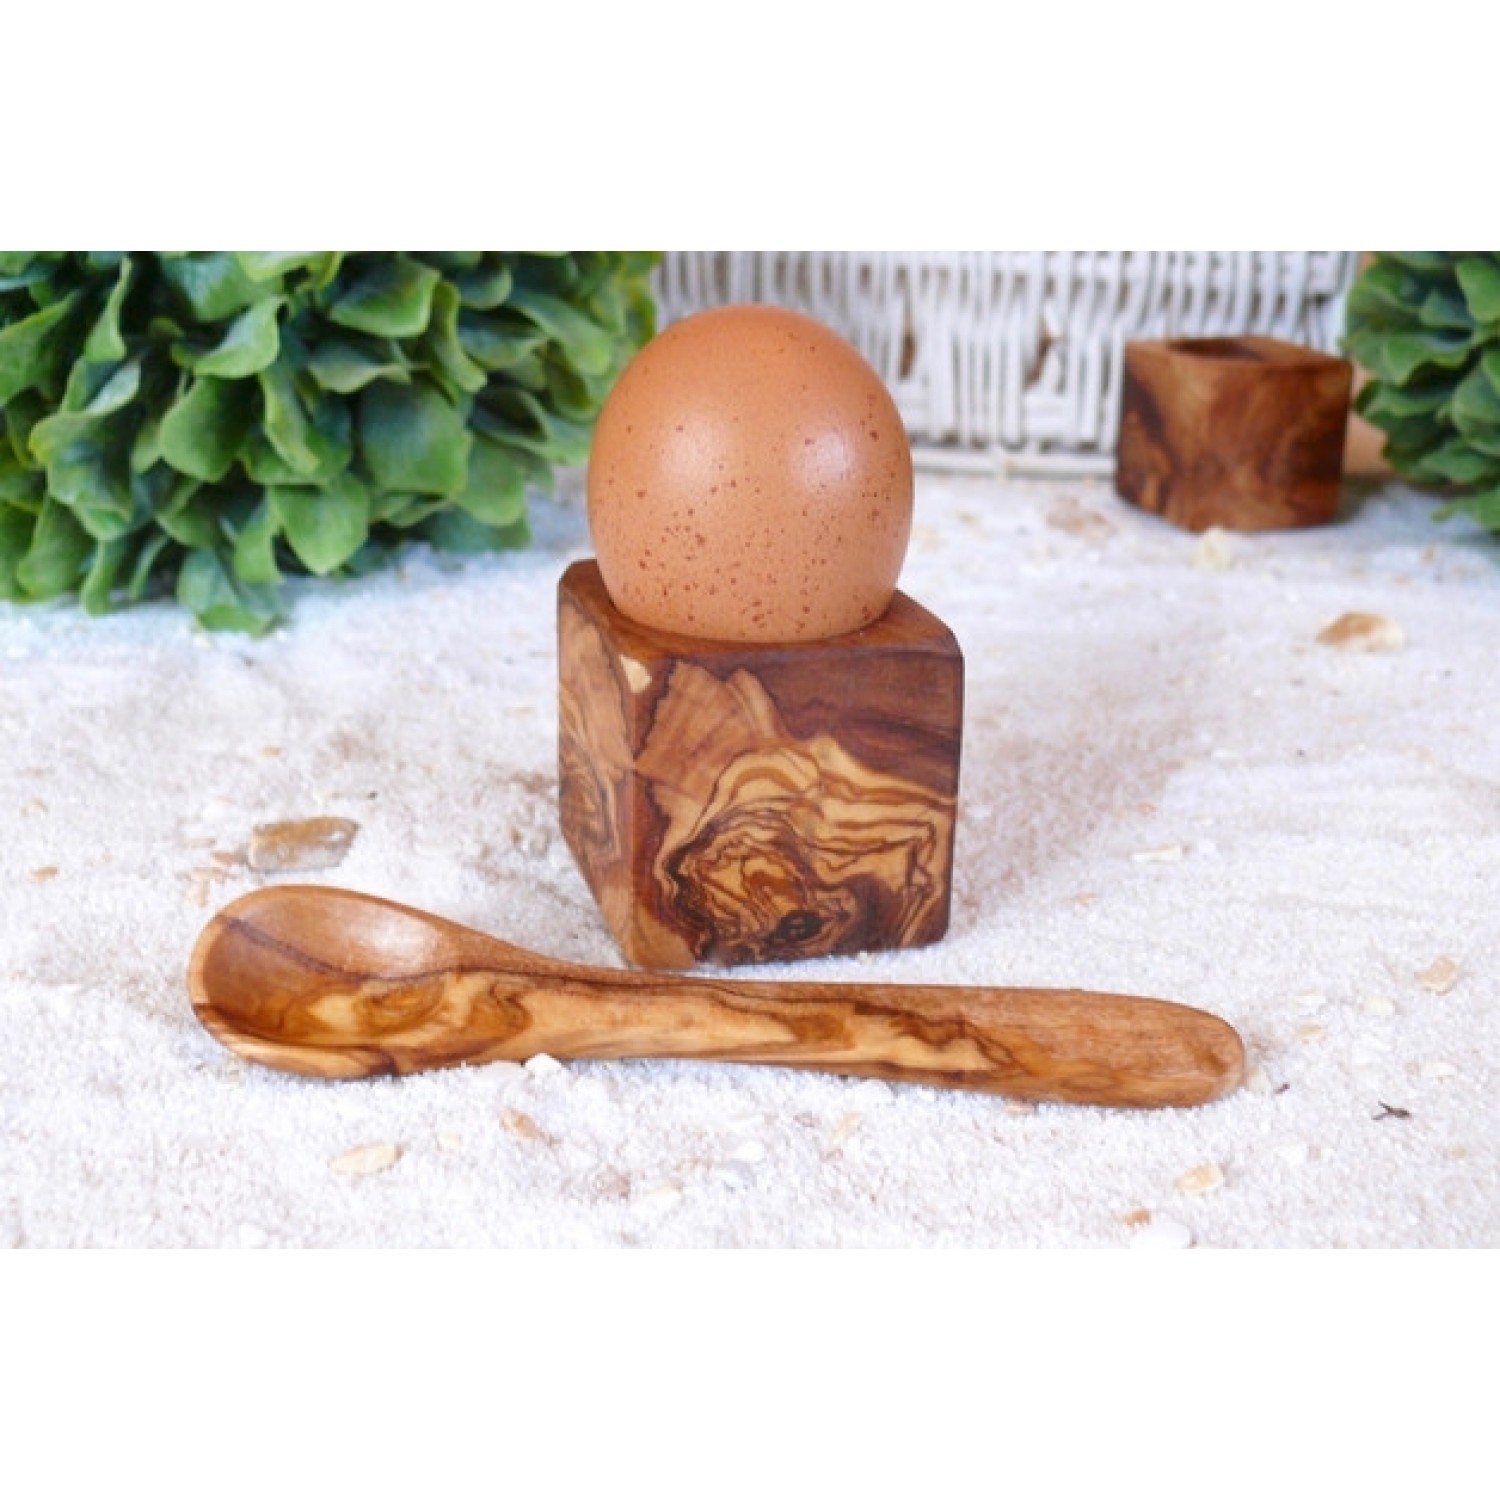 Egg Cup "Cube" made of Olive Wood with Eggspoon | Olivenholz erleben